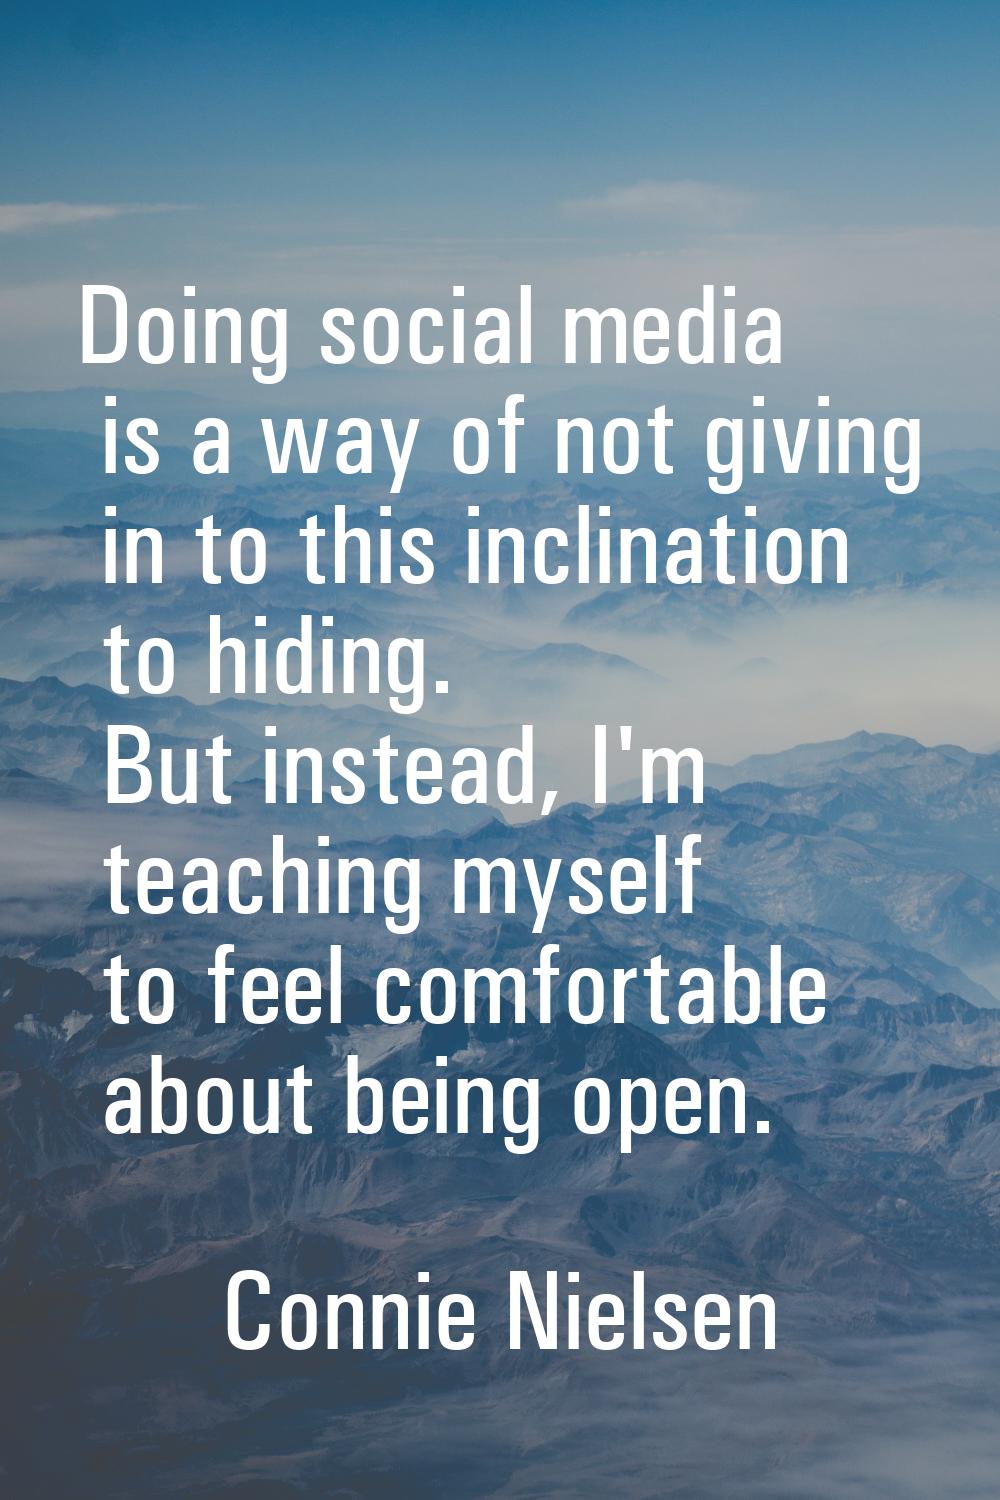 Doing social media is a way of not giving in to this inclination to hiding. But instead, I'm teachi